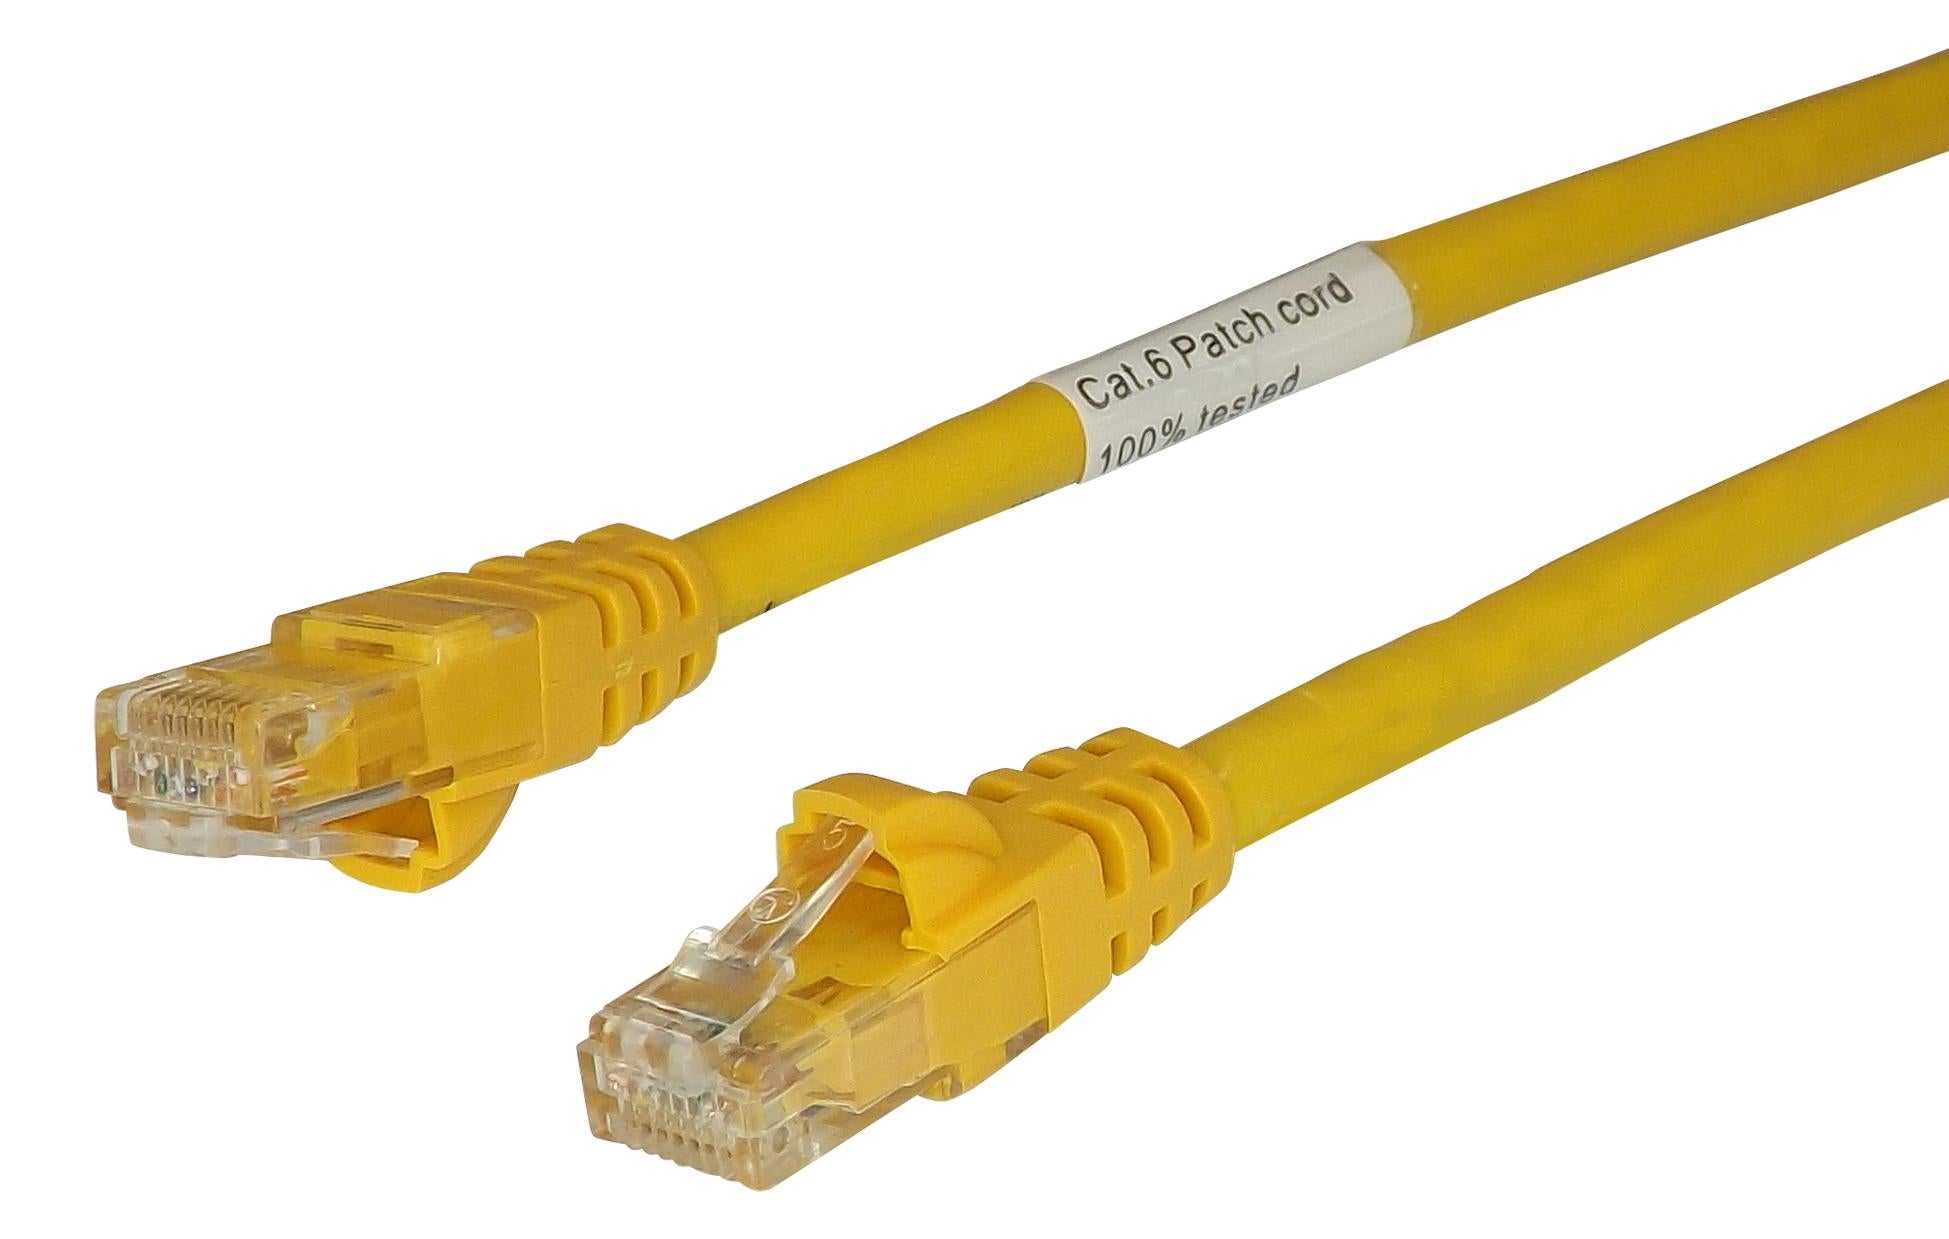 SP3YW PATCH CABLE, RJ45, CAT6, 3M, YELLOW TUK